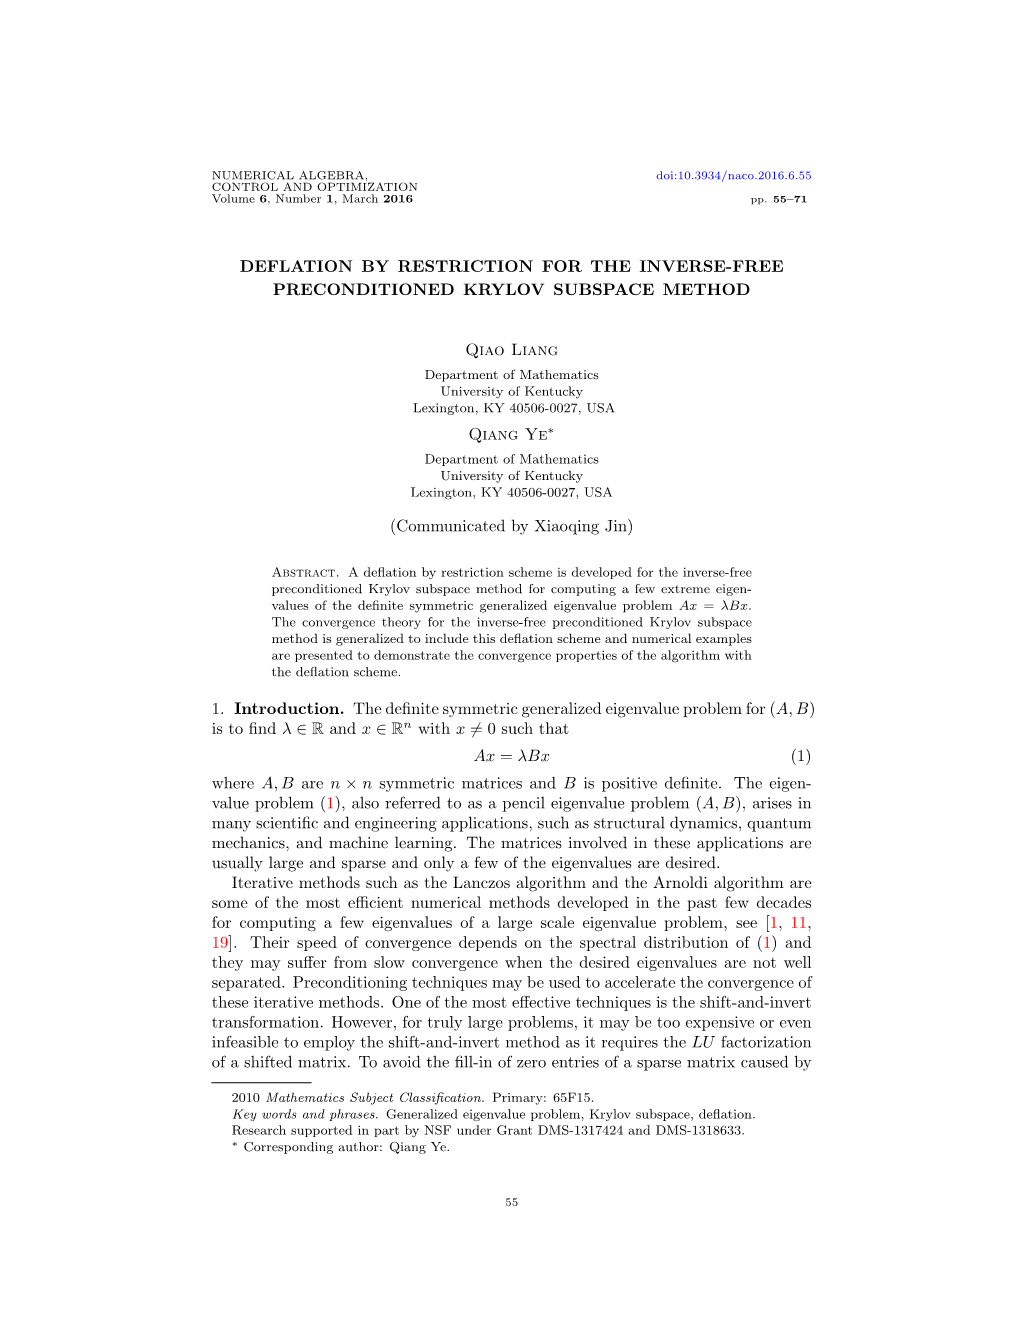 Deflation by Restriction for the Inverse-Free Preconditioned Krylov Subspace Method